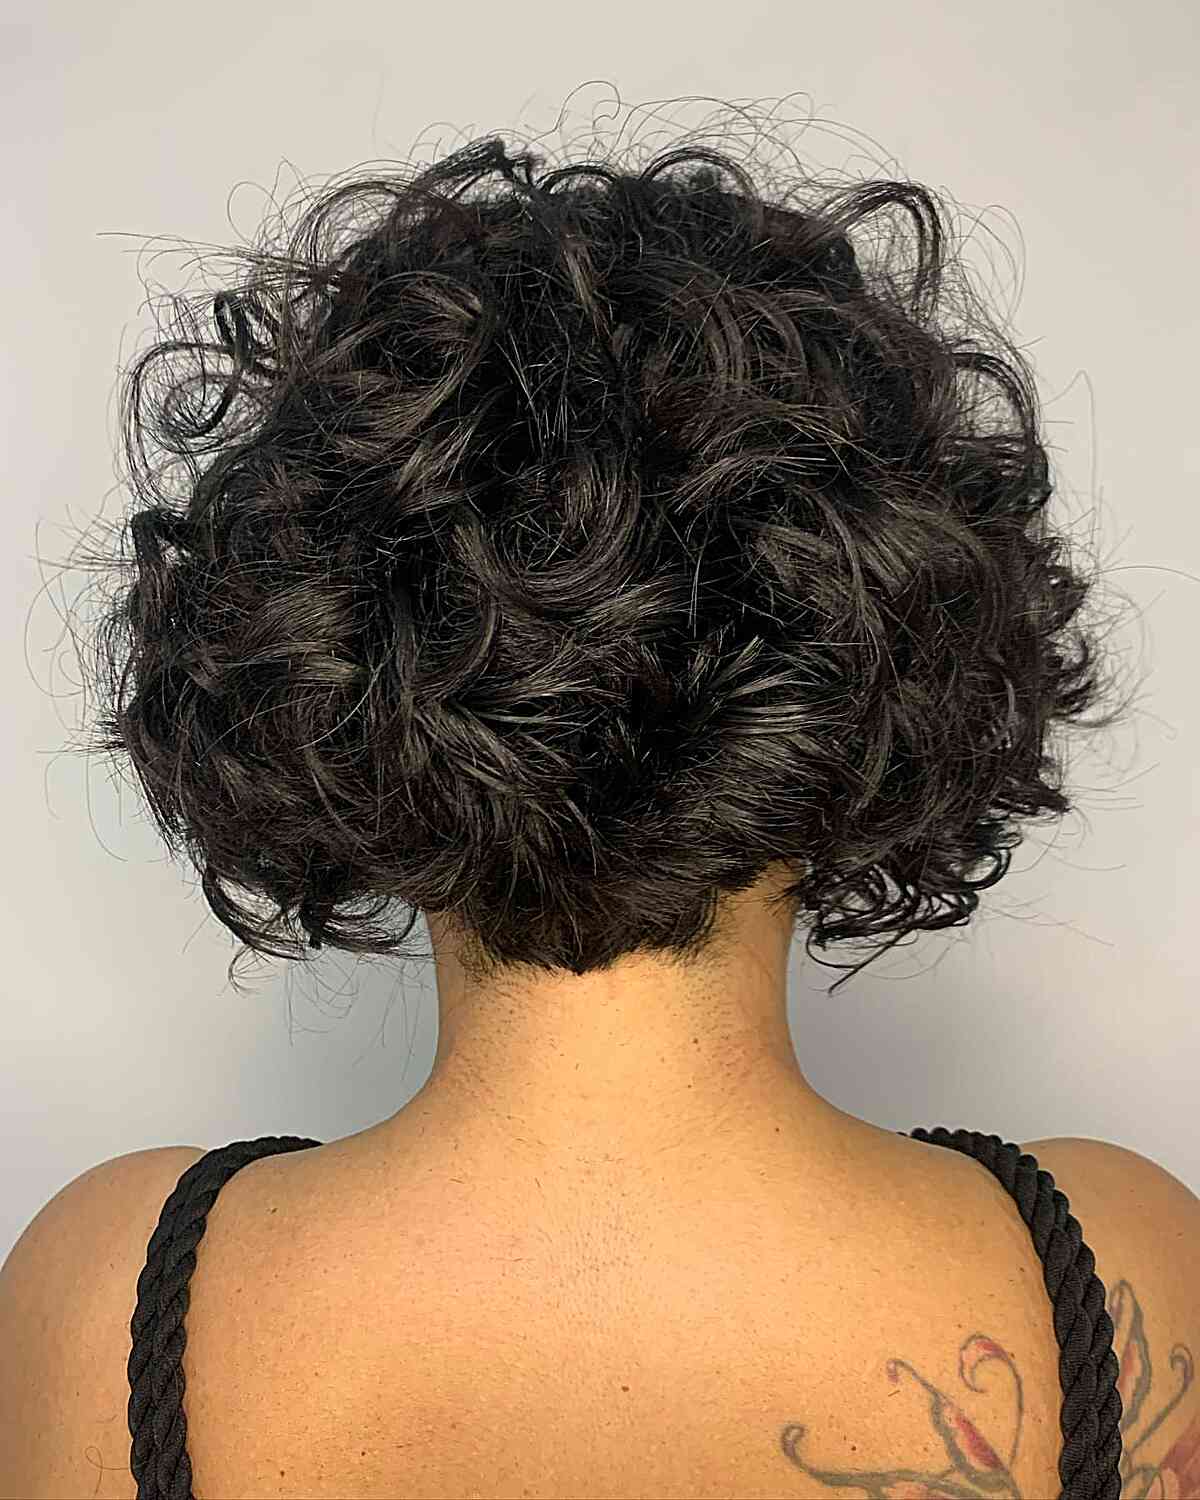 49 Dark Short Haircut Ideas and Inspirations - Page 34 of 49